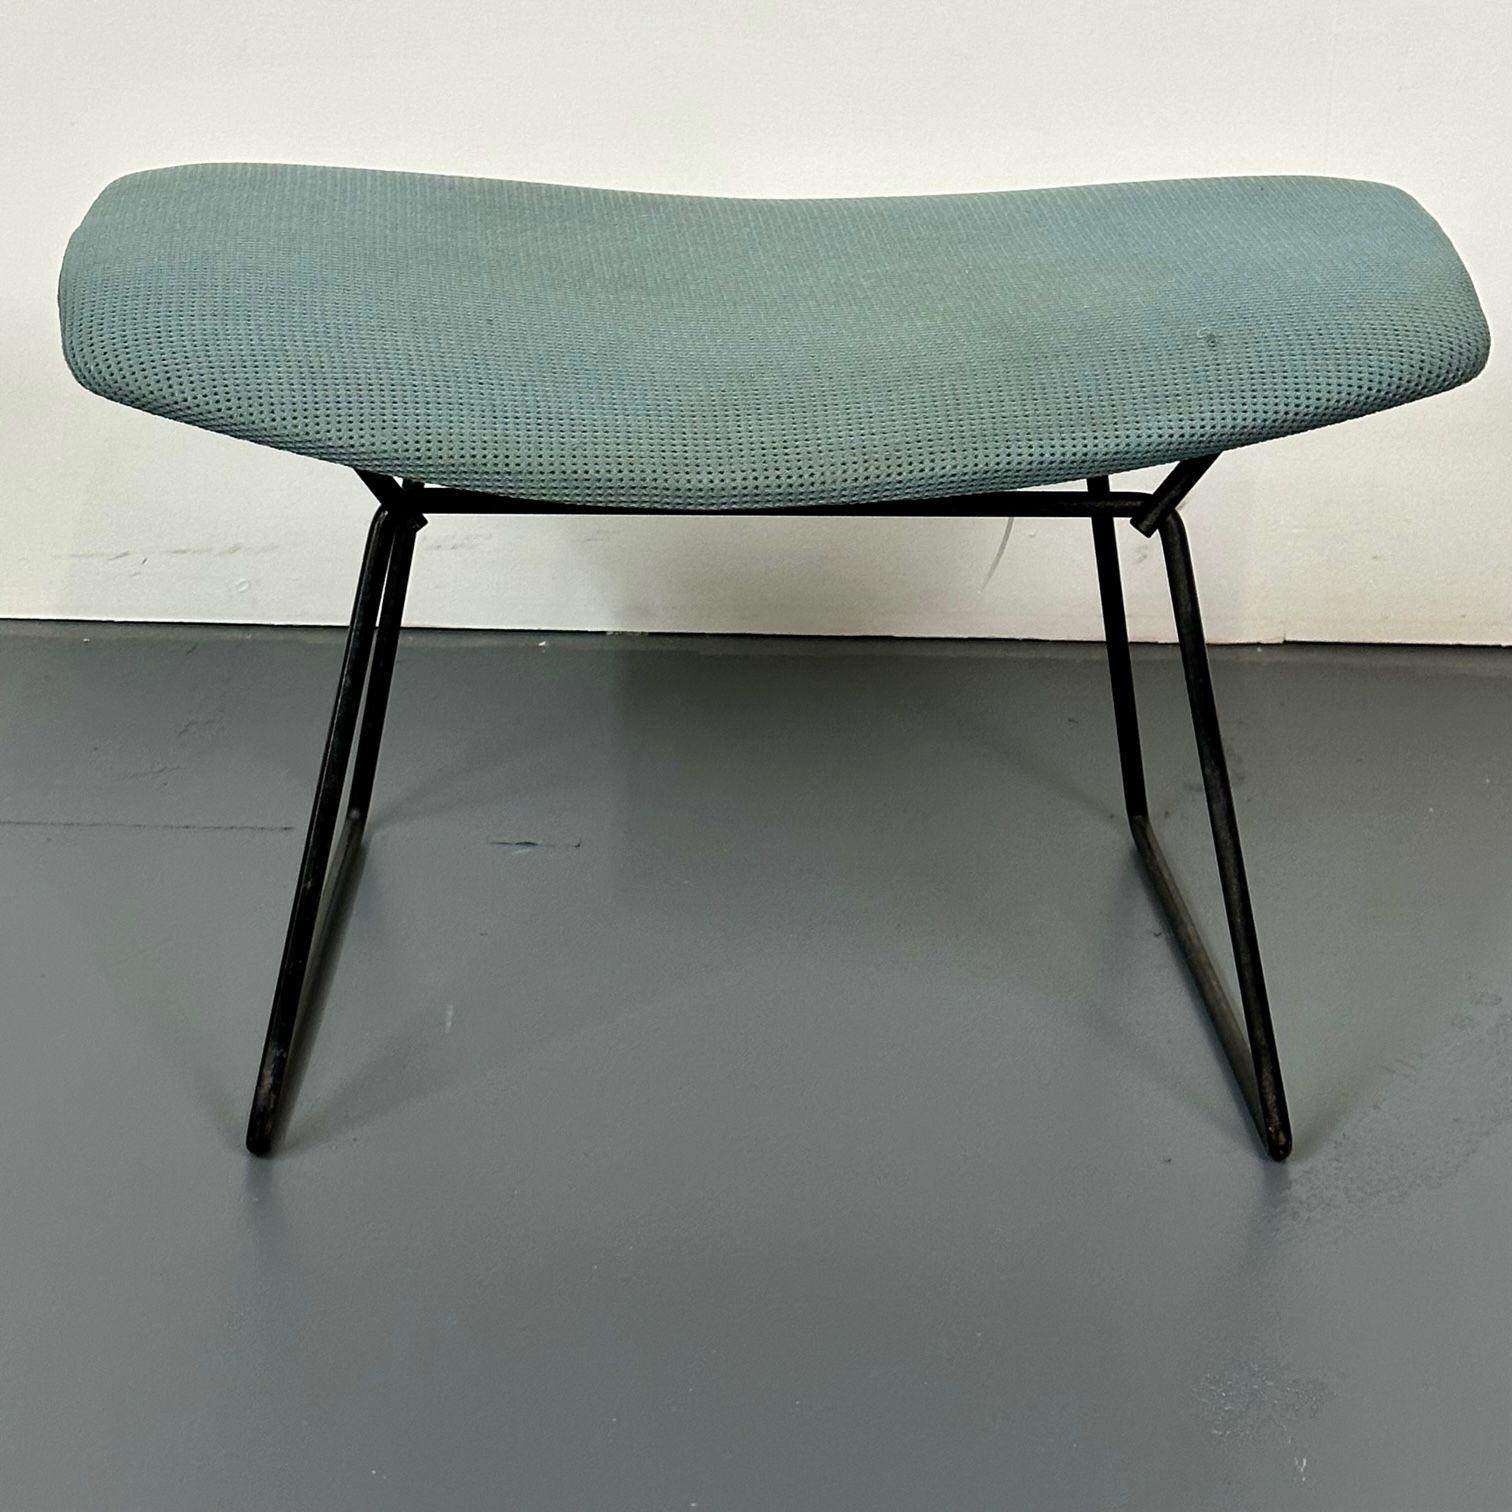 Vintage Harry Bertoia for Knoll Bird Lounge Chair with Ottoman, Labeled, 1960s For Sale 3